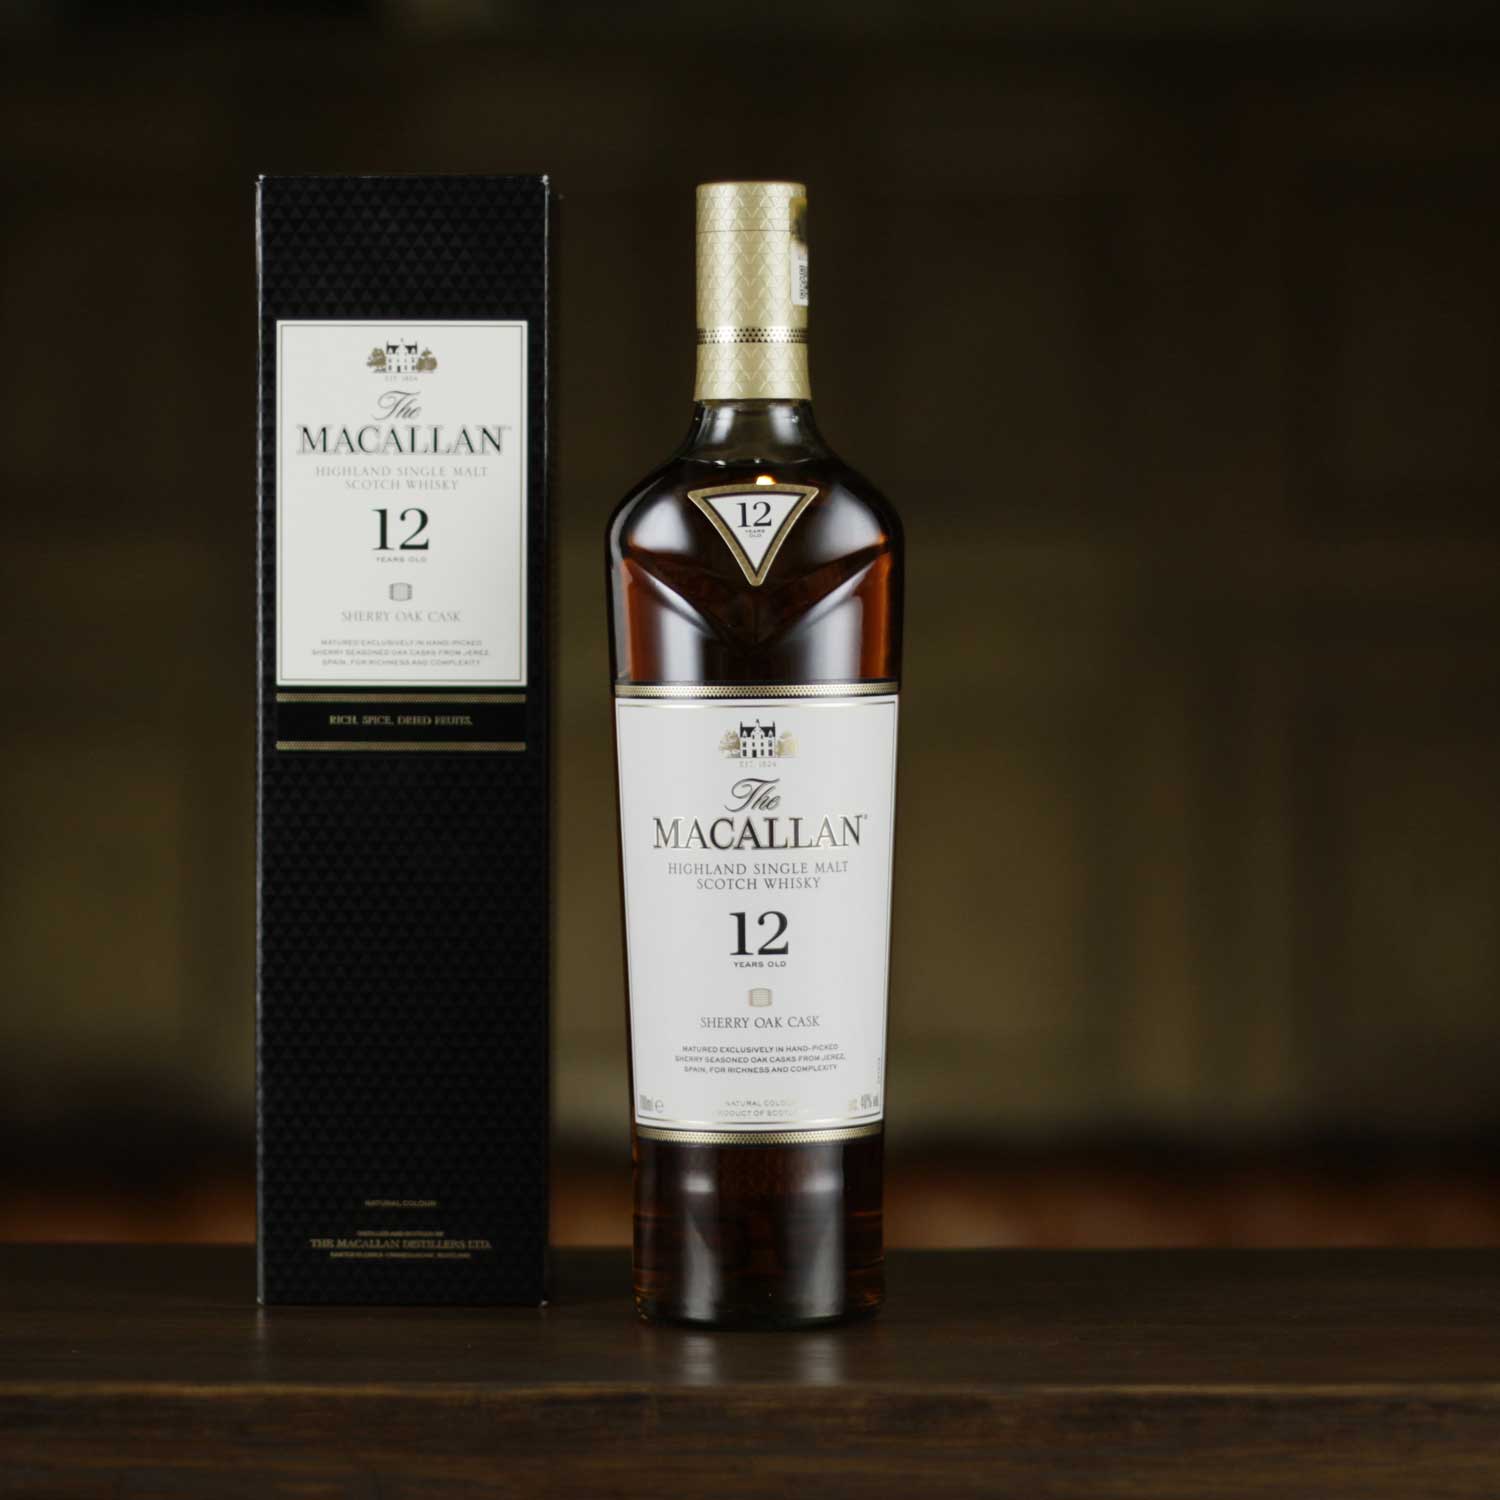 The Macallan 12 Year Old Sherry Oak Whisky